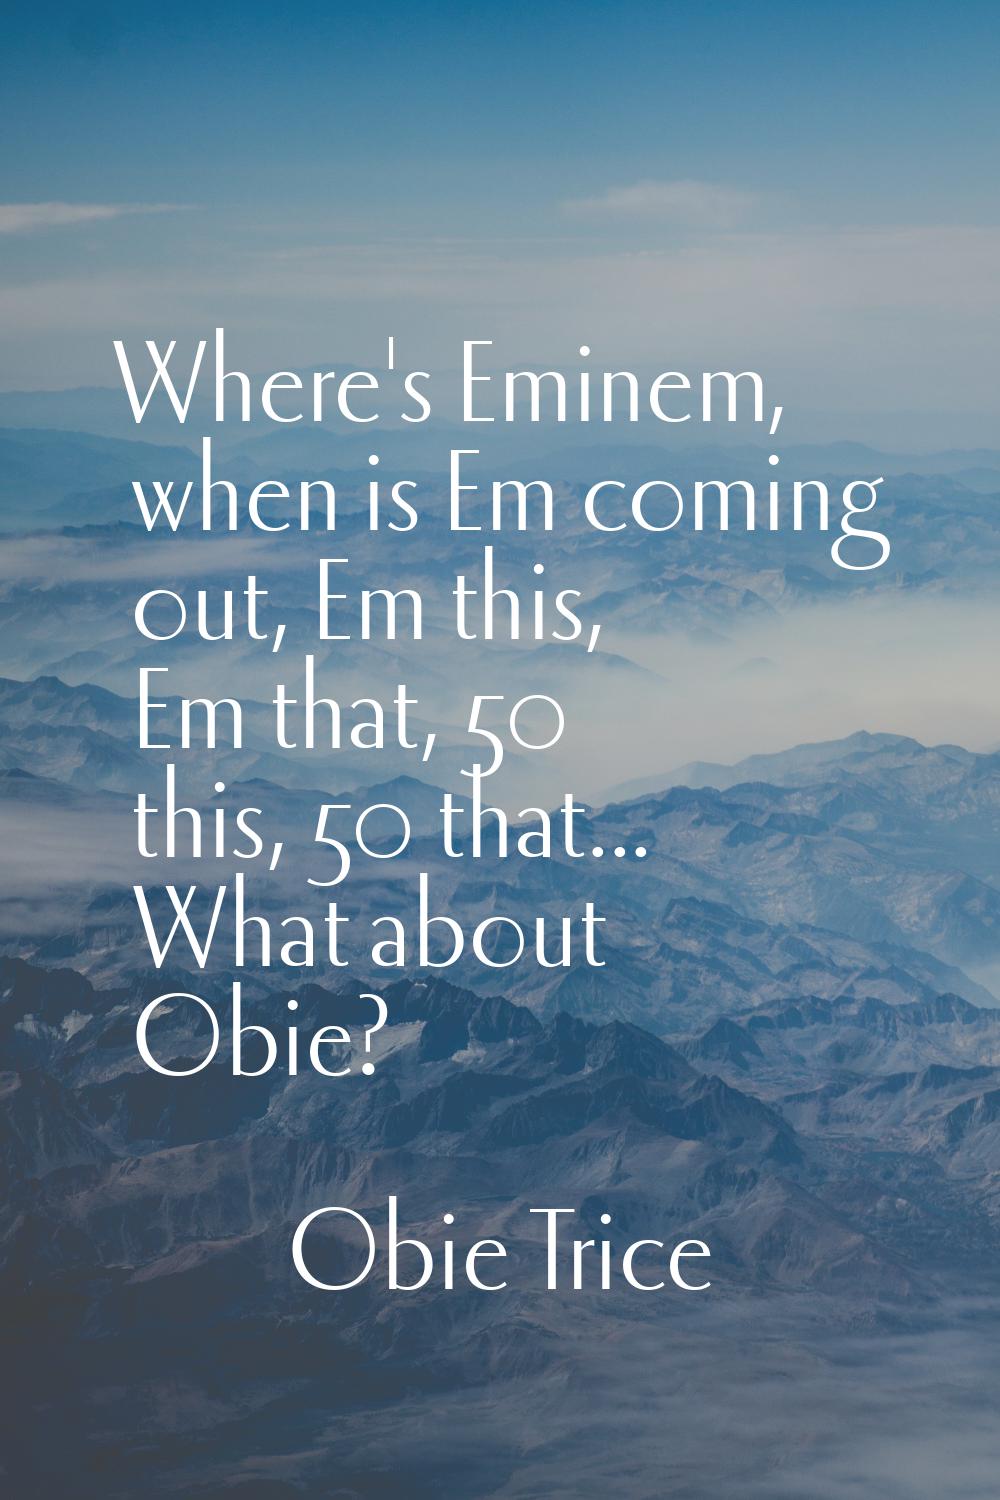 Where's Eminem, when is Em coming out, Em this, Em that, 50 this, 50 that... What about Obie?